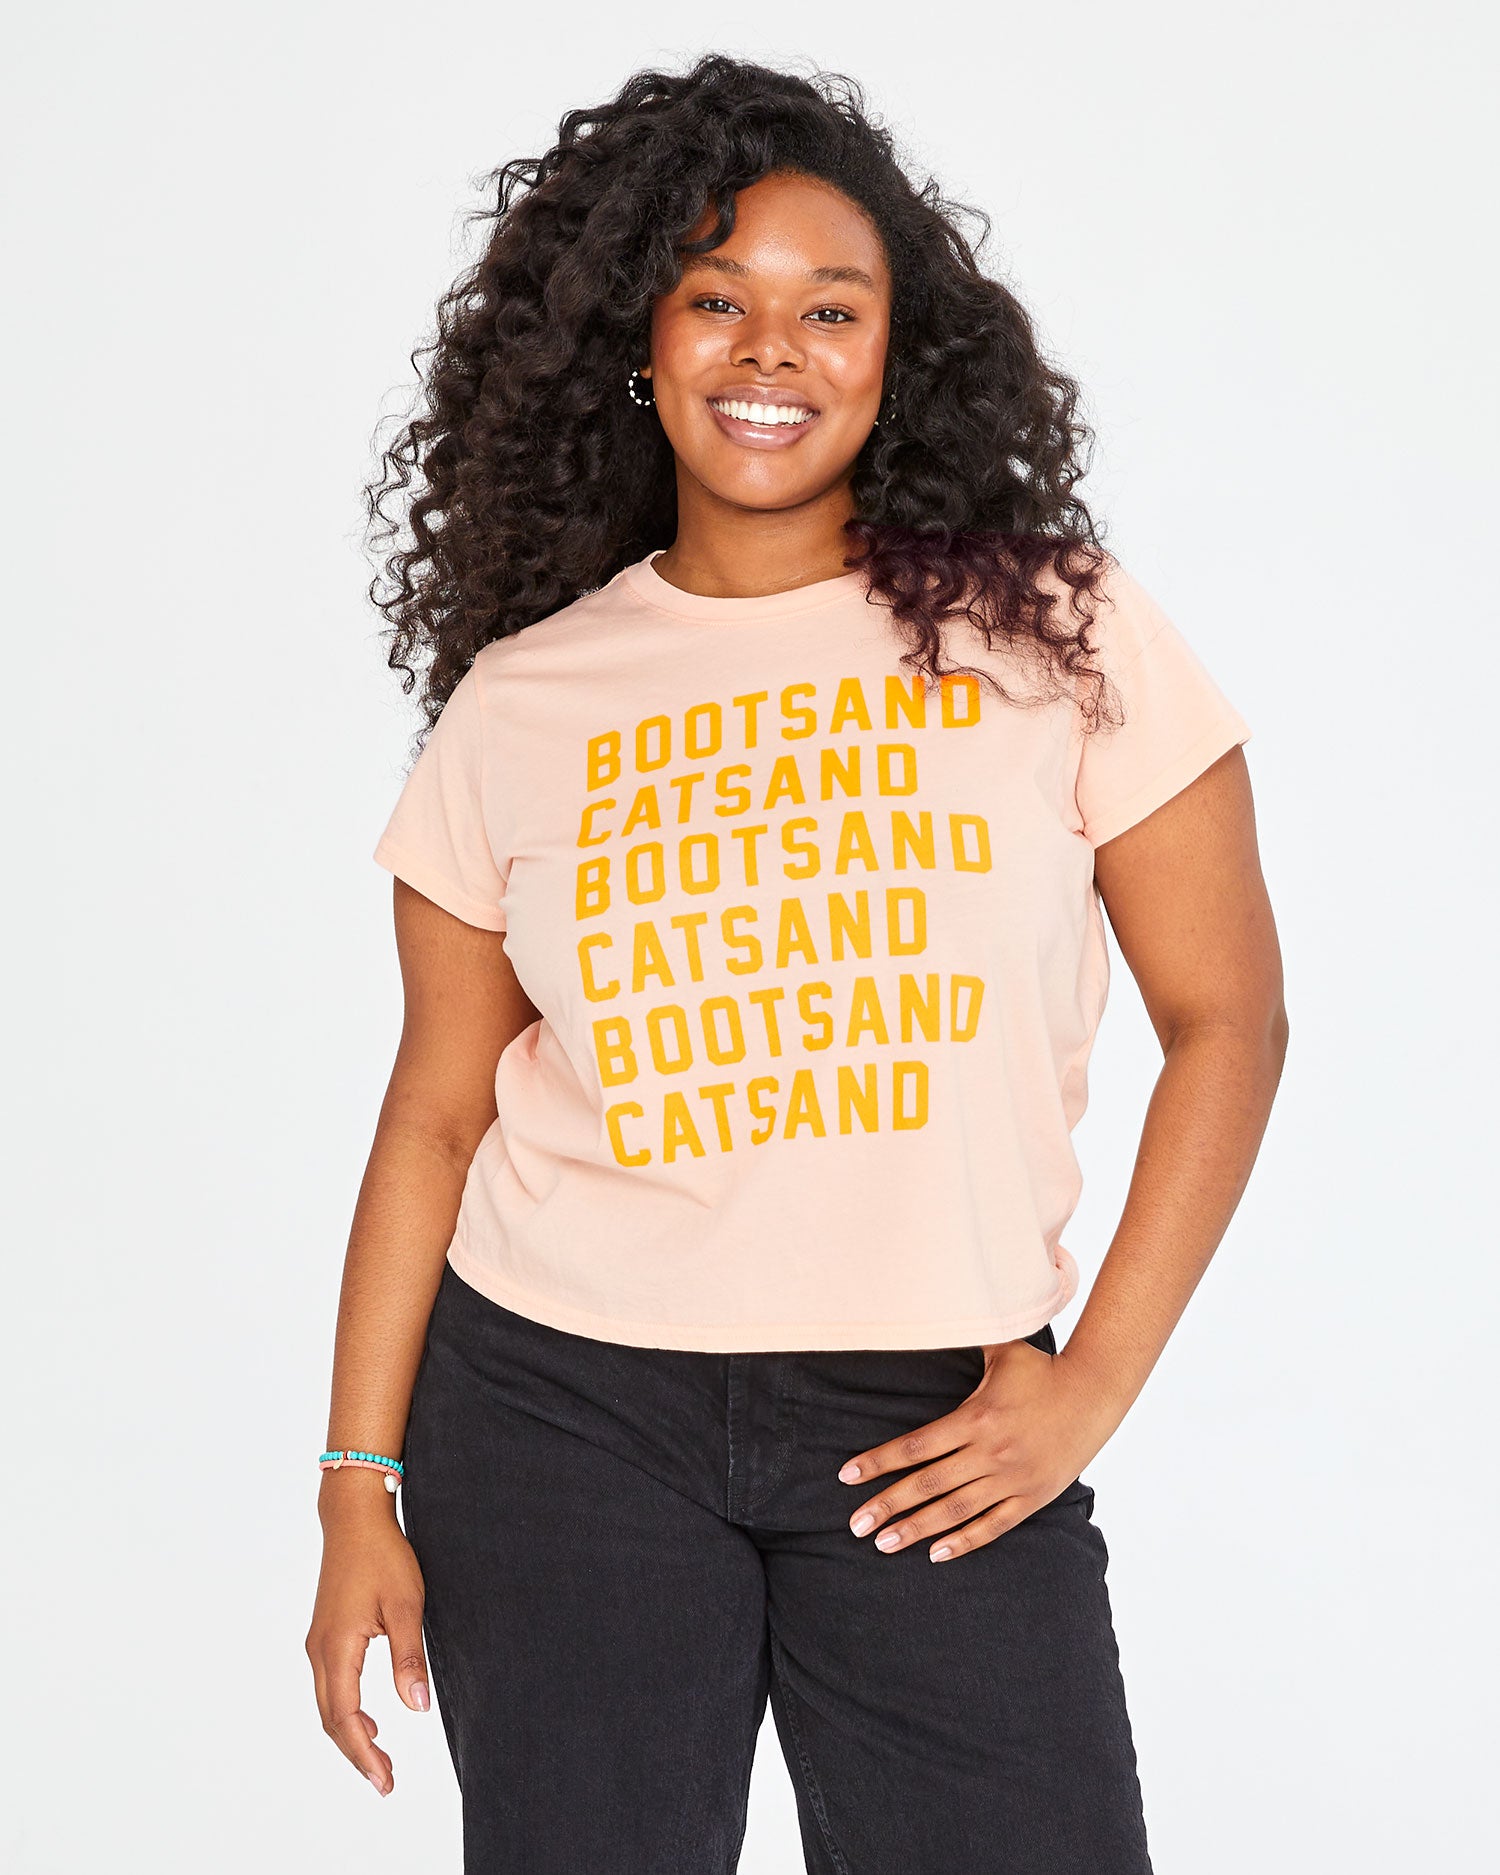 Candice wearing the Blush with Neon Orange Boots and Cats print Classic Tee with black jeans